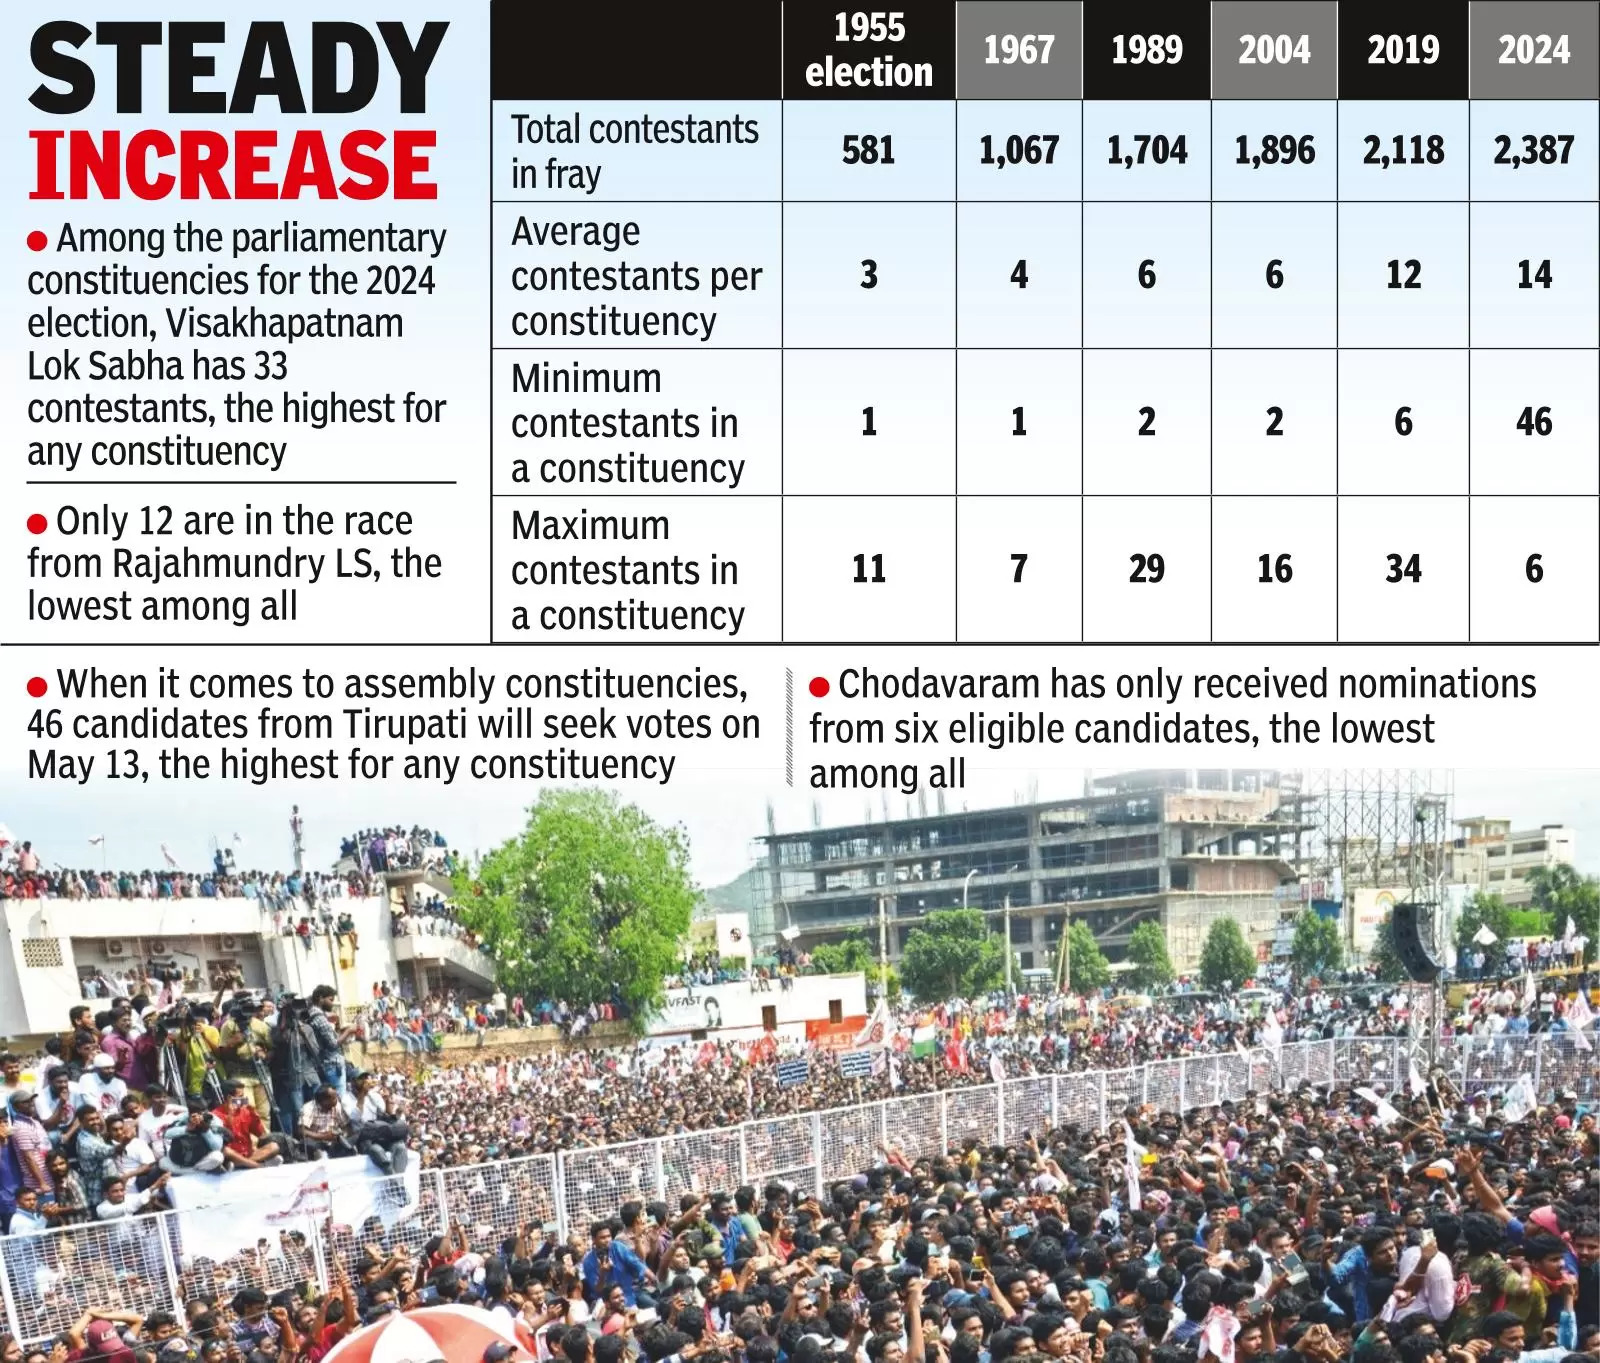 LS candidates rise by 42% compared to 2019 elections